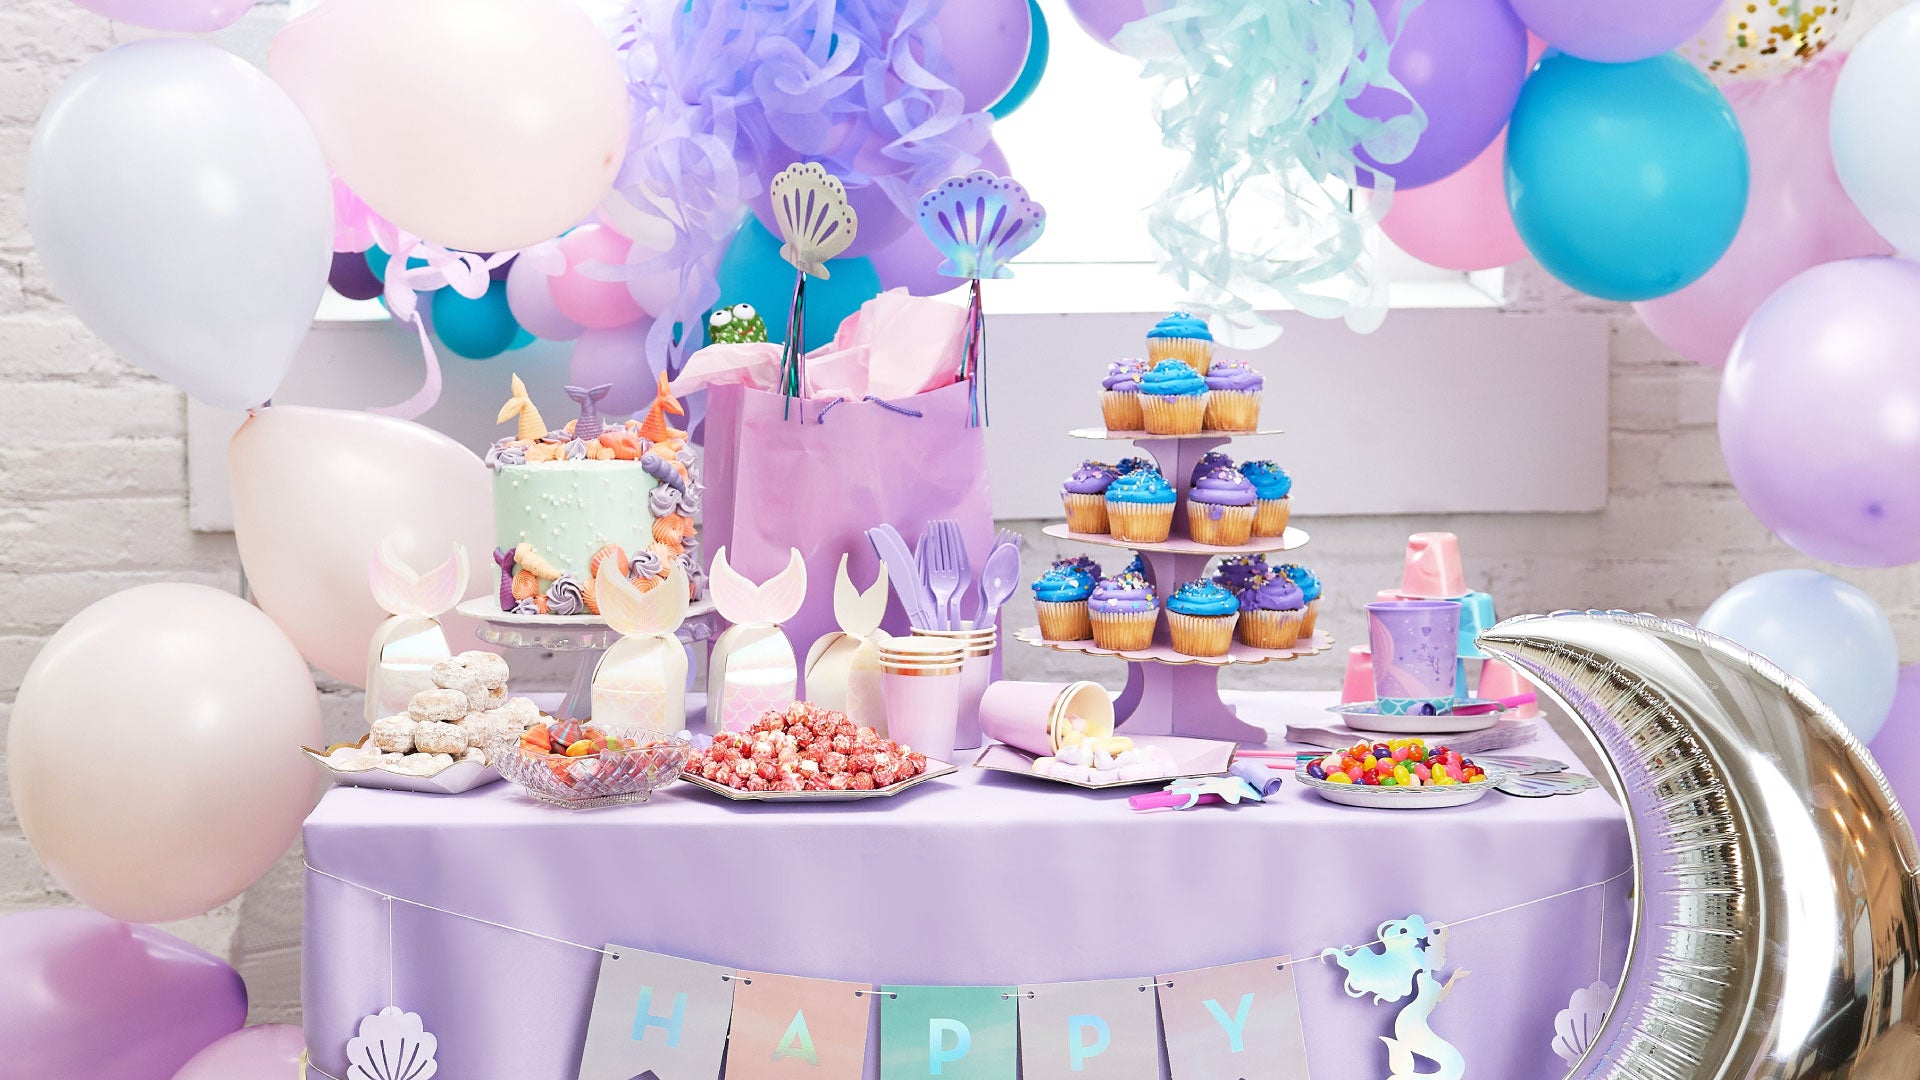 Purple Party Streamer  Sweet 16 Party Decorations